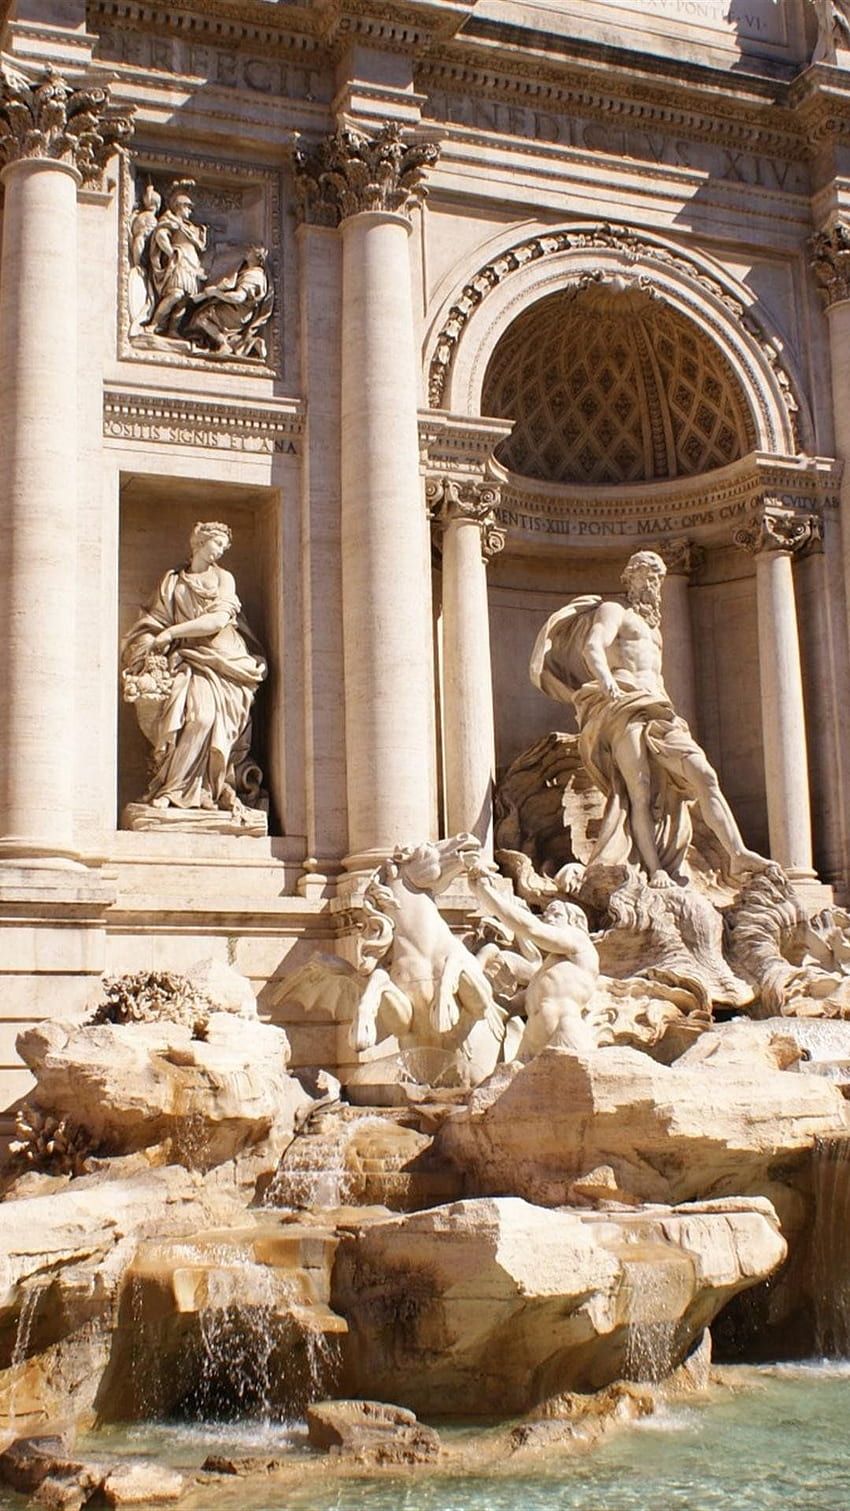 The Trevi fountain is one of the most famous fountains in the world. - Statue